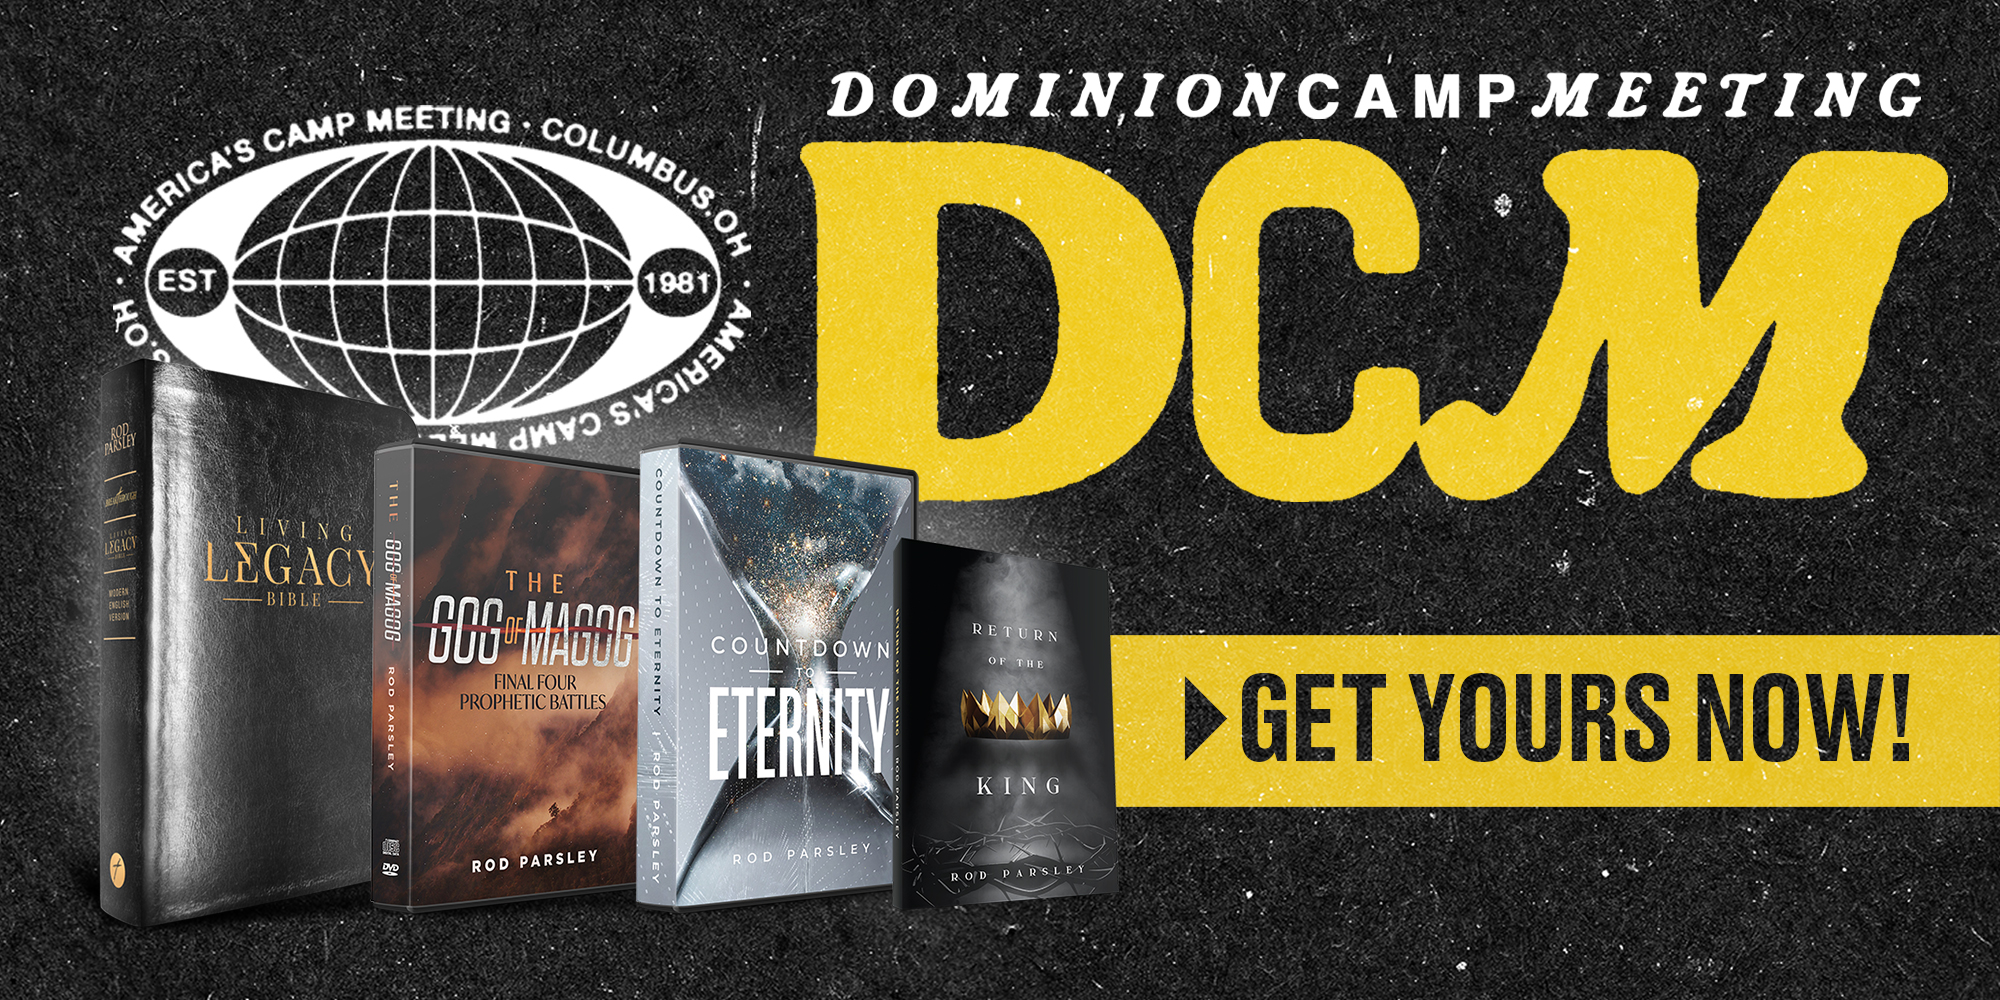 Americas Camp Meeting Dominion Camp Meeting DCM Get Yours Now!